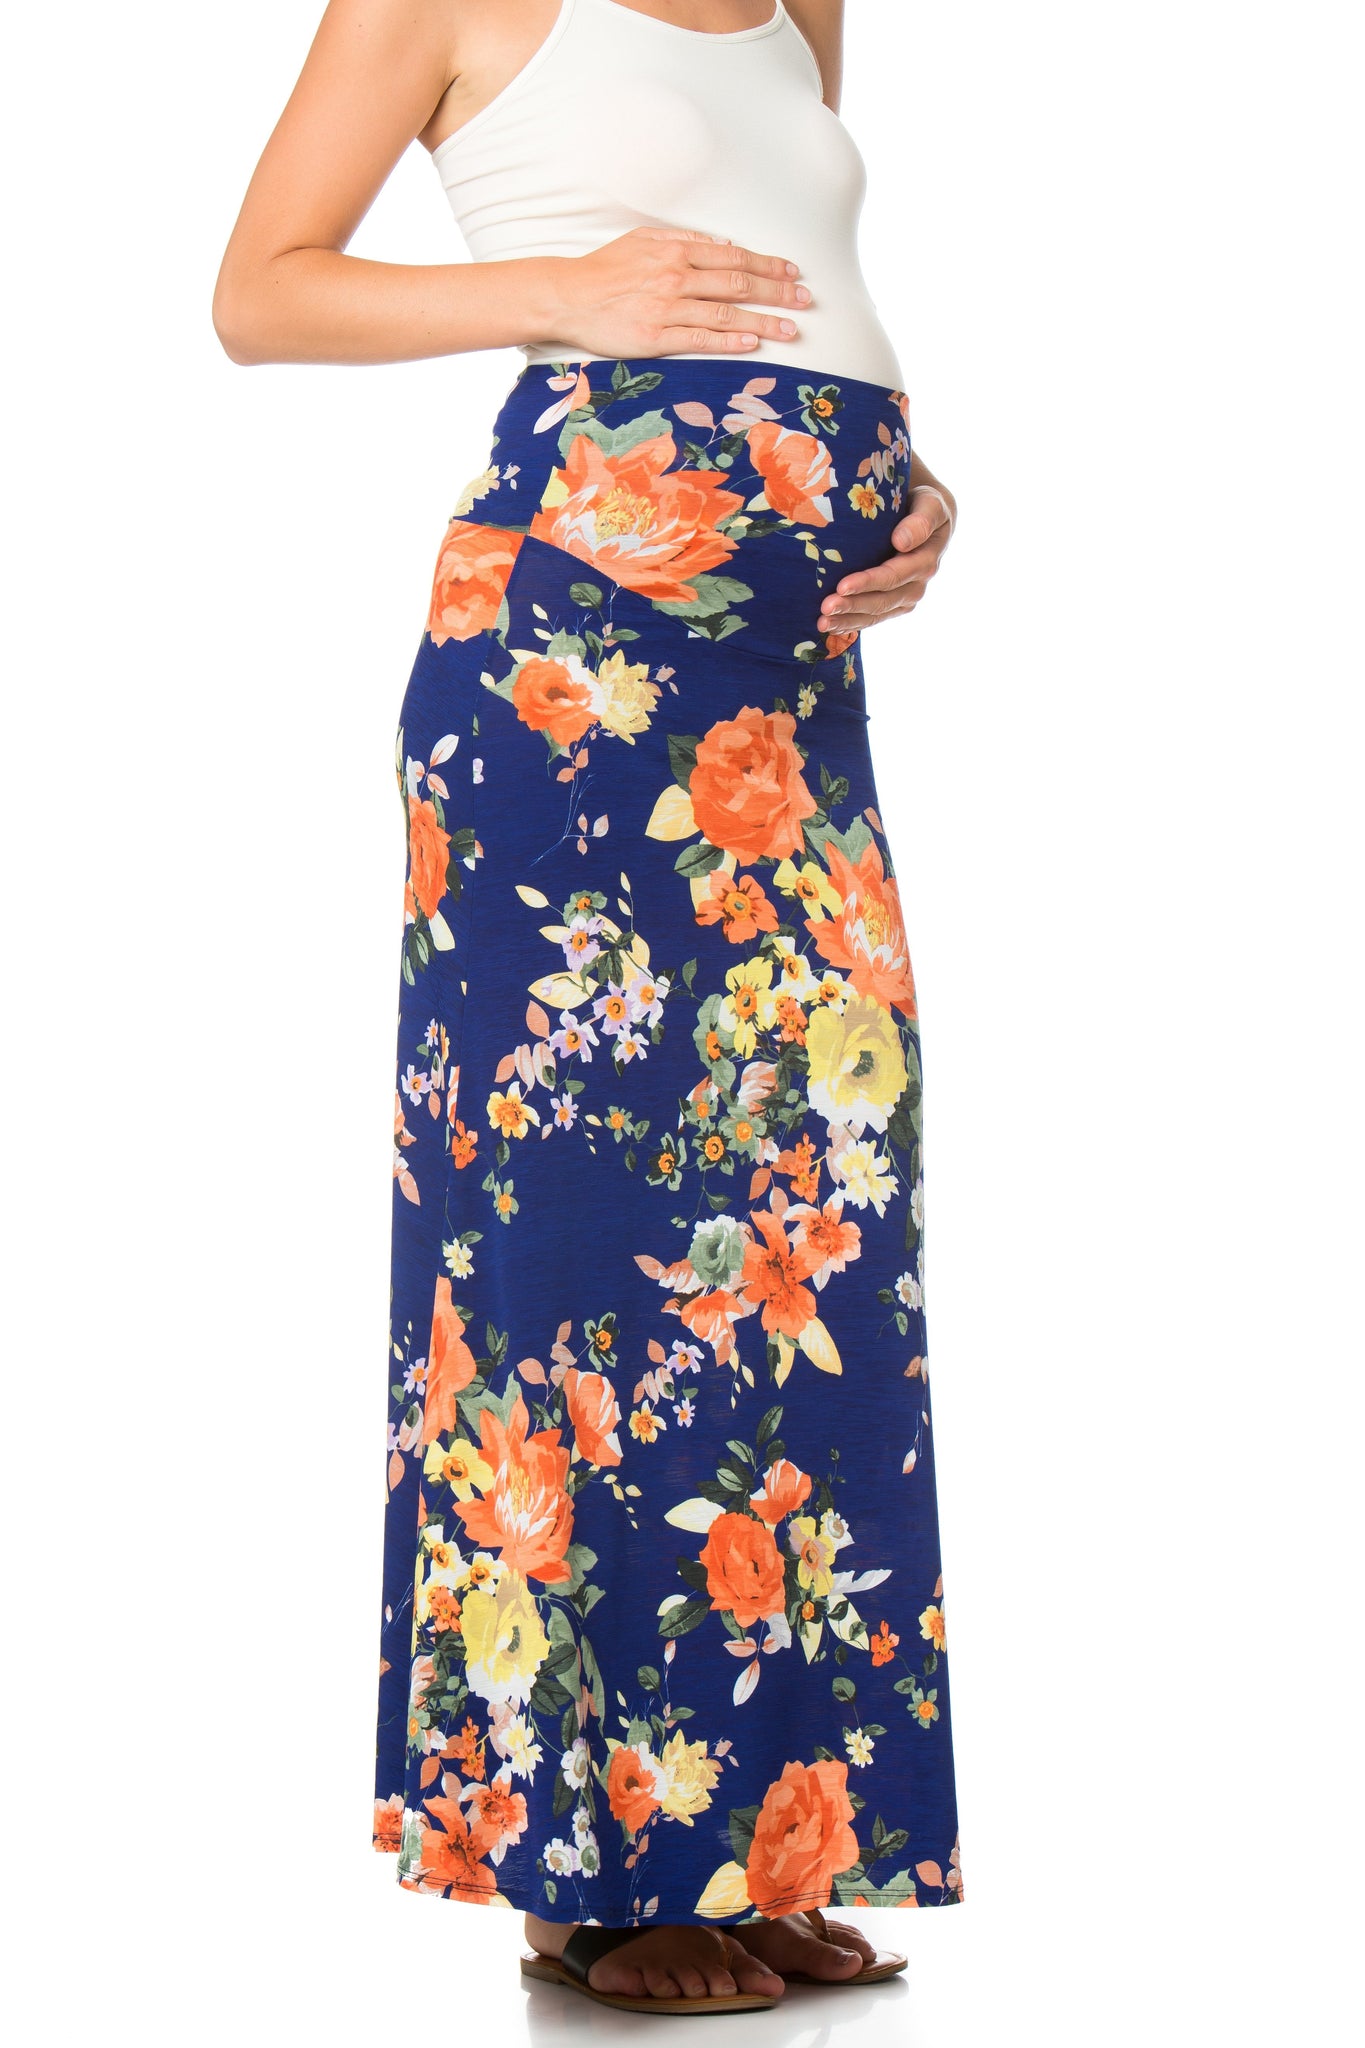 maternity pregnancy spring summer casual daily maxi skirt